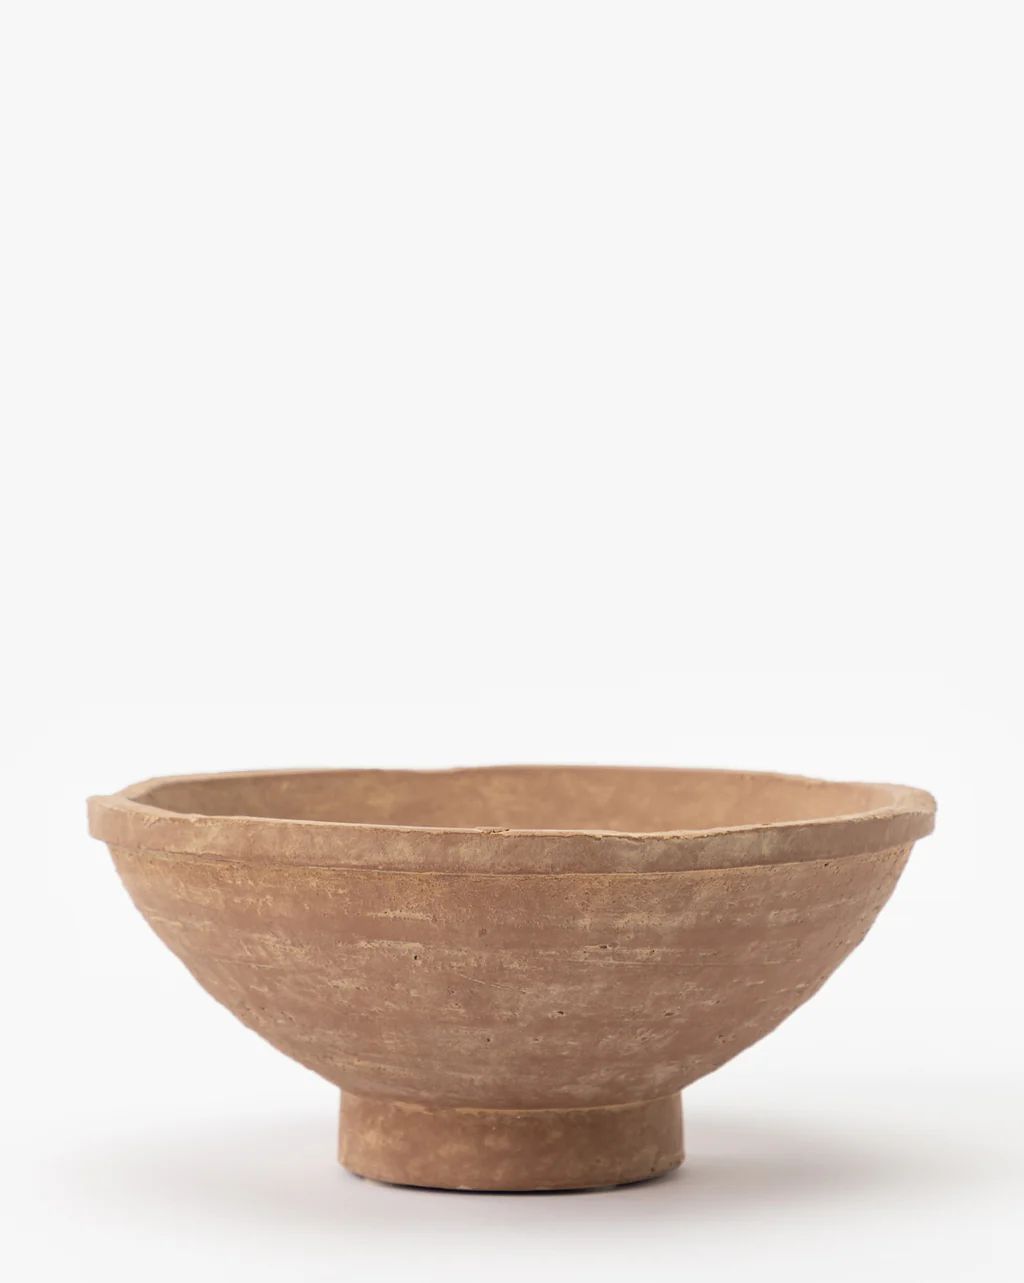 Theoden Terracotta Bowl | McGee & Co.